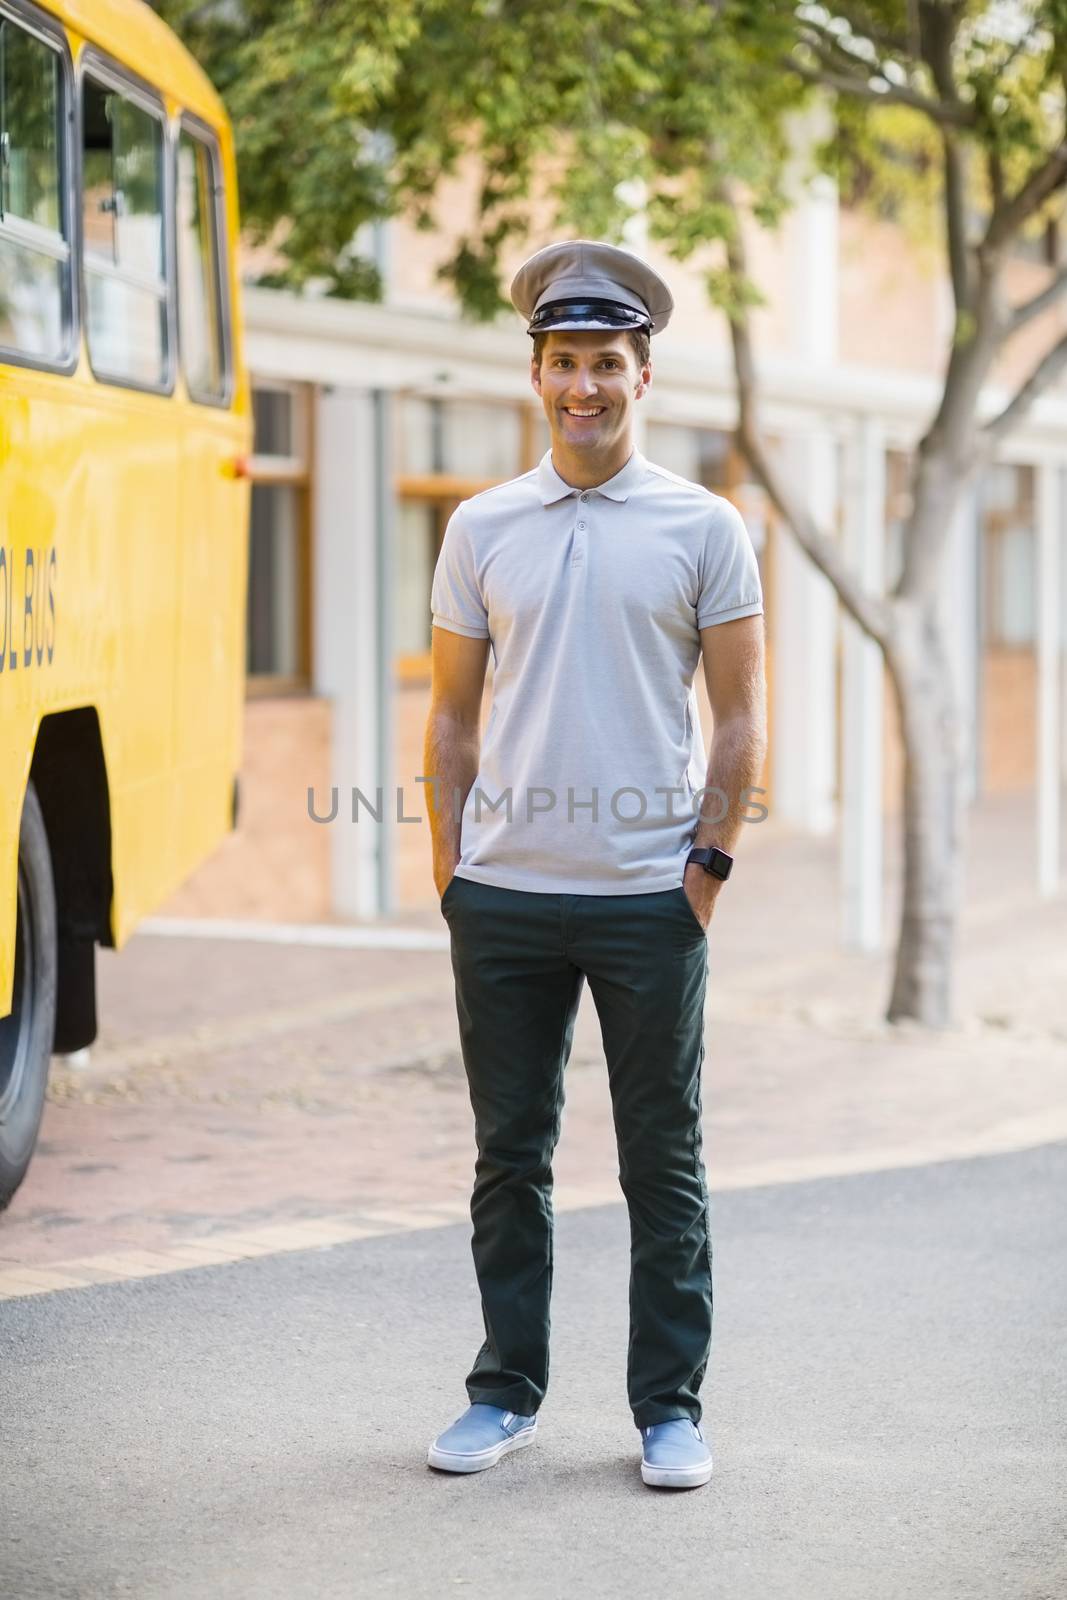 Smiling bus driver standing with hands in pocket in front of bus by Wavebreakmedia